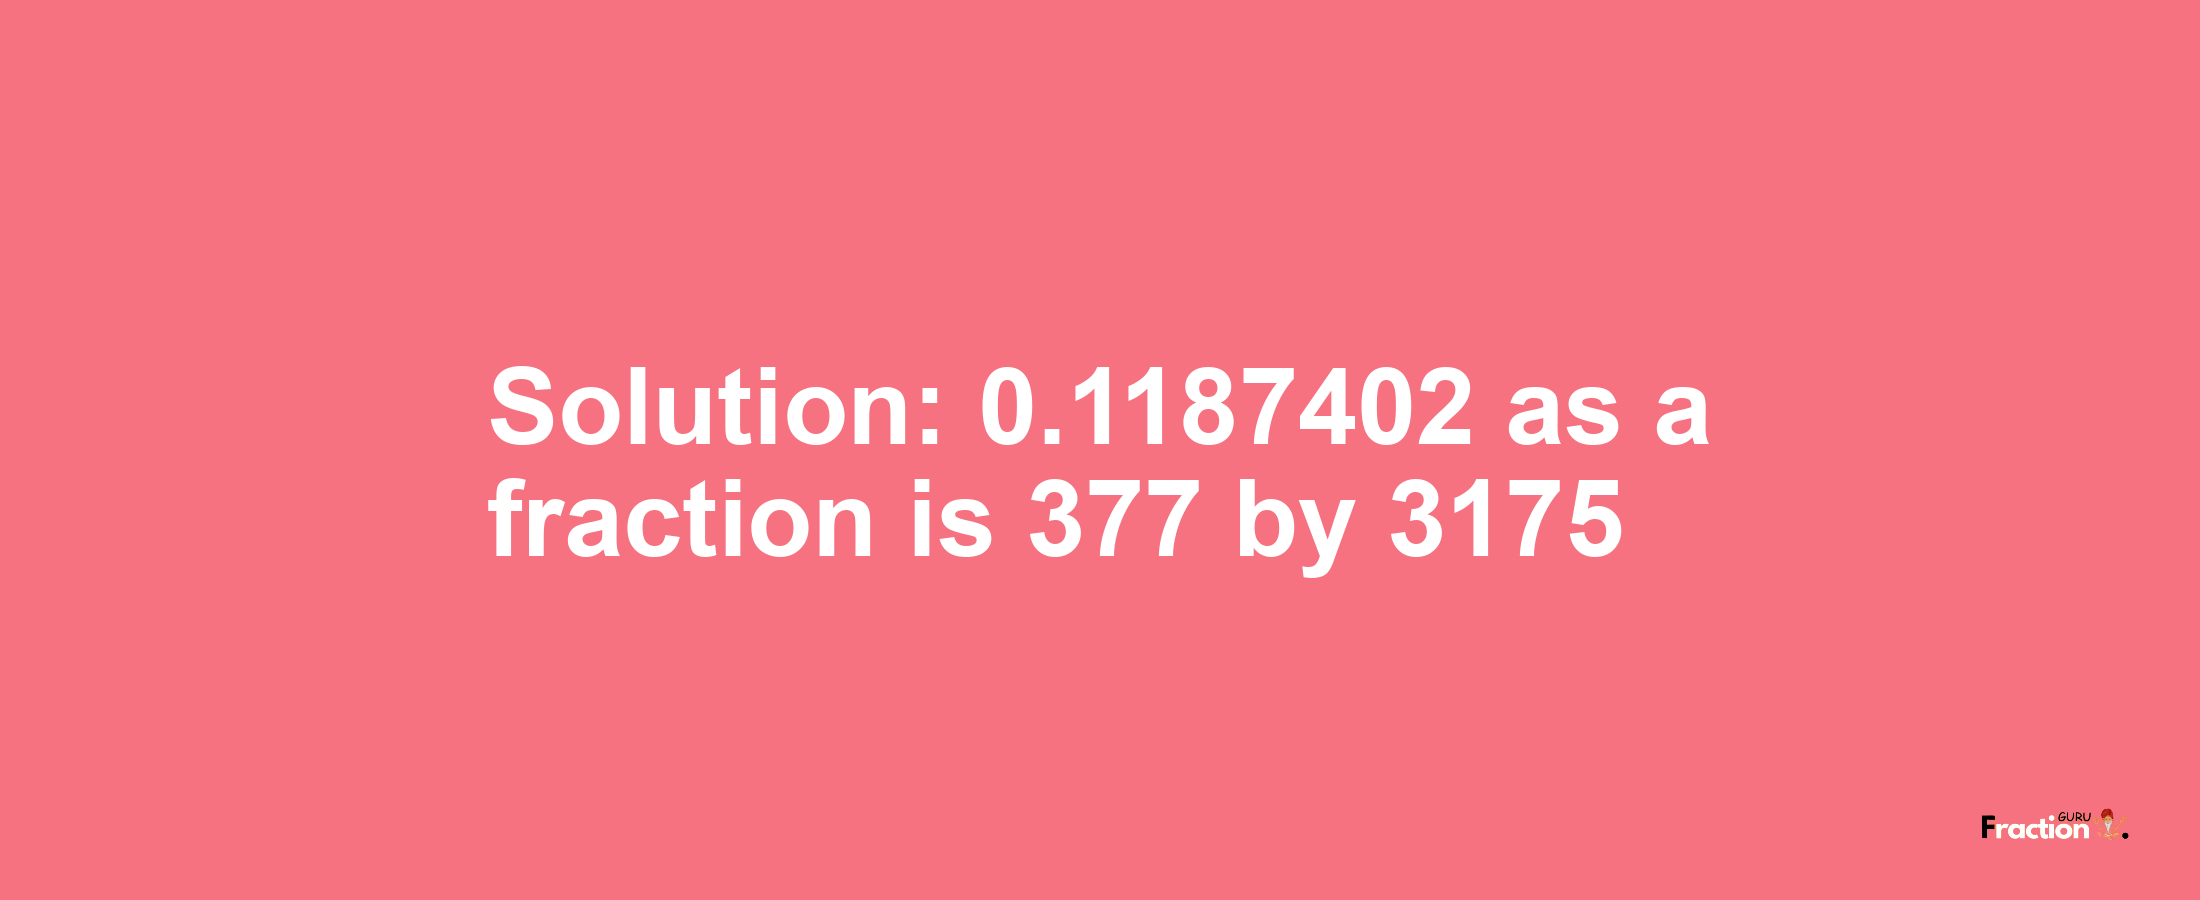 Solution:0.1187402 as a fraction is 377/3175